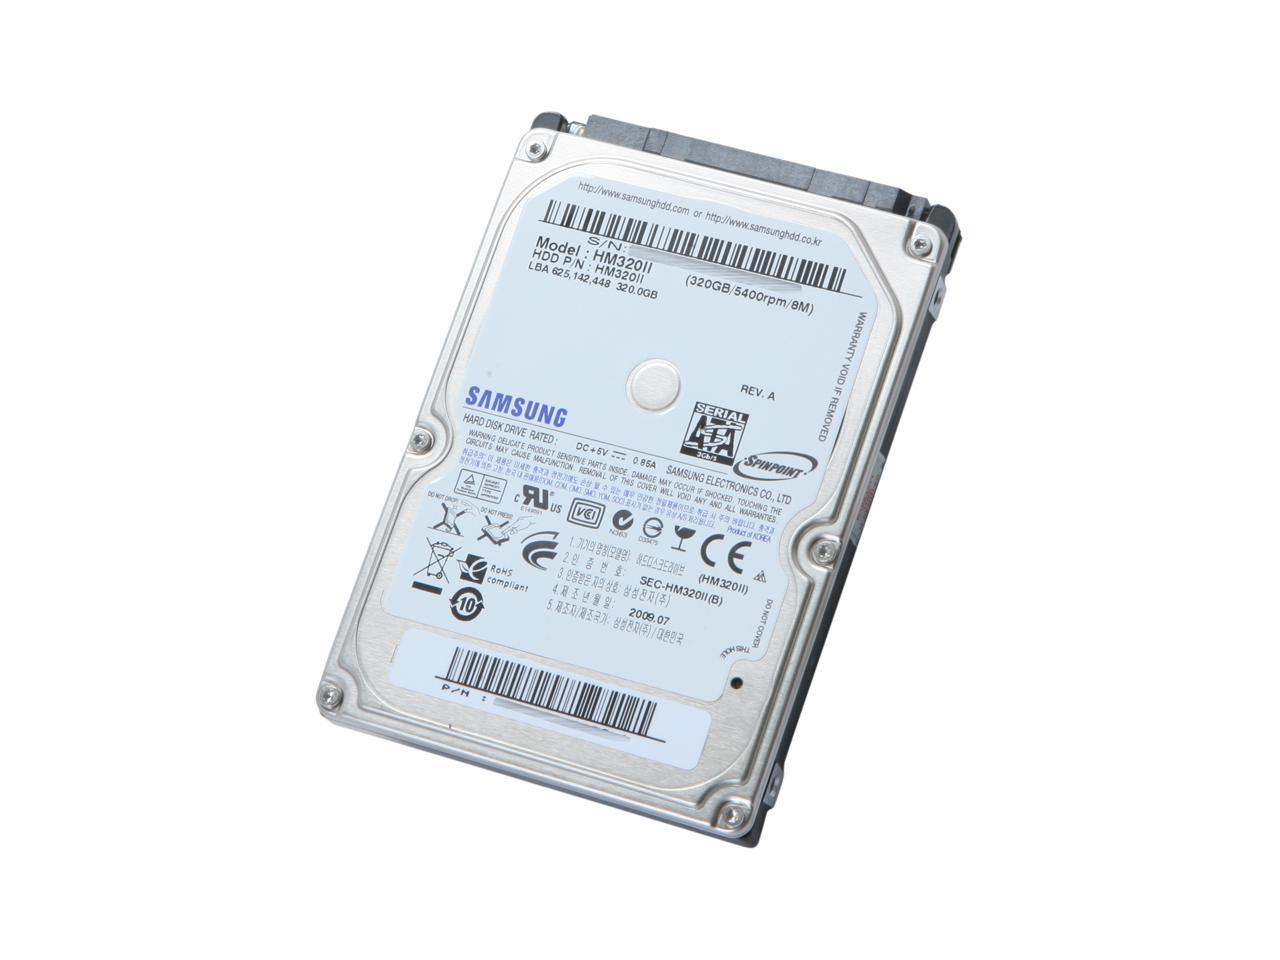 Samsung Spinpoint M7 Hm320Ii 320Gb 5400 Rpm 8Mb Cache Sata 3.0Gb/S 2.5" Internal Notebook Hard Drive Bare Drive